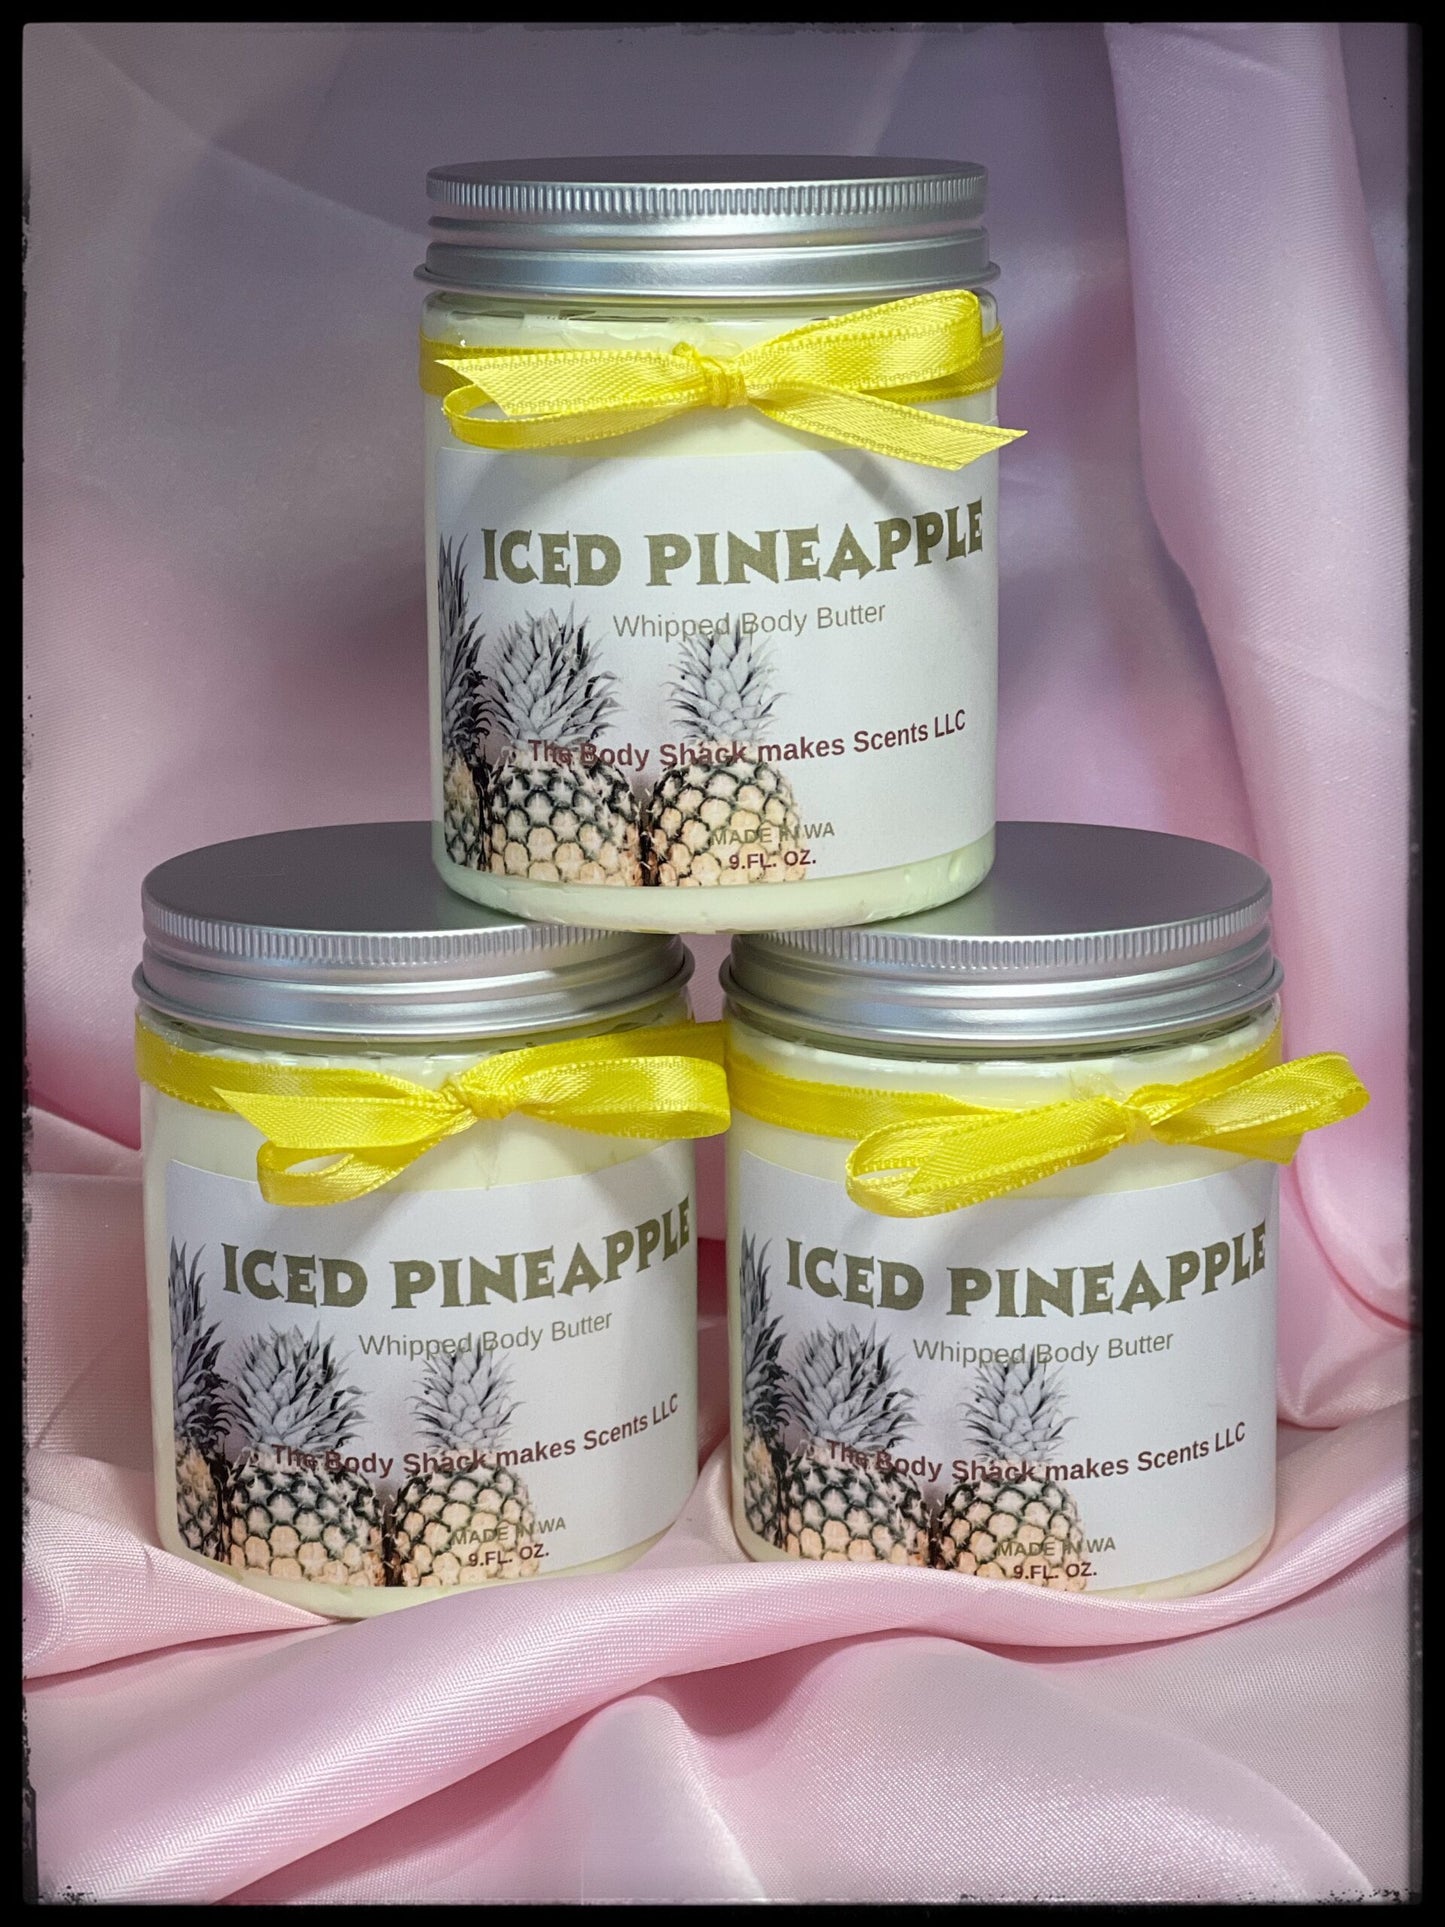 Iced Pineapple Whipped Body Butter